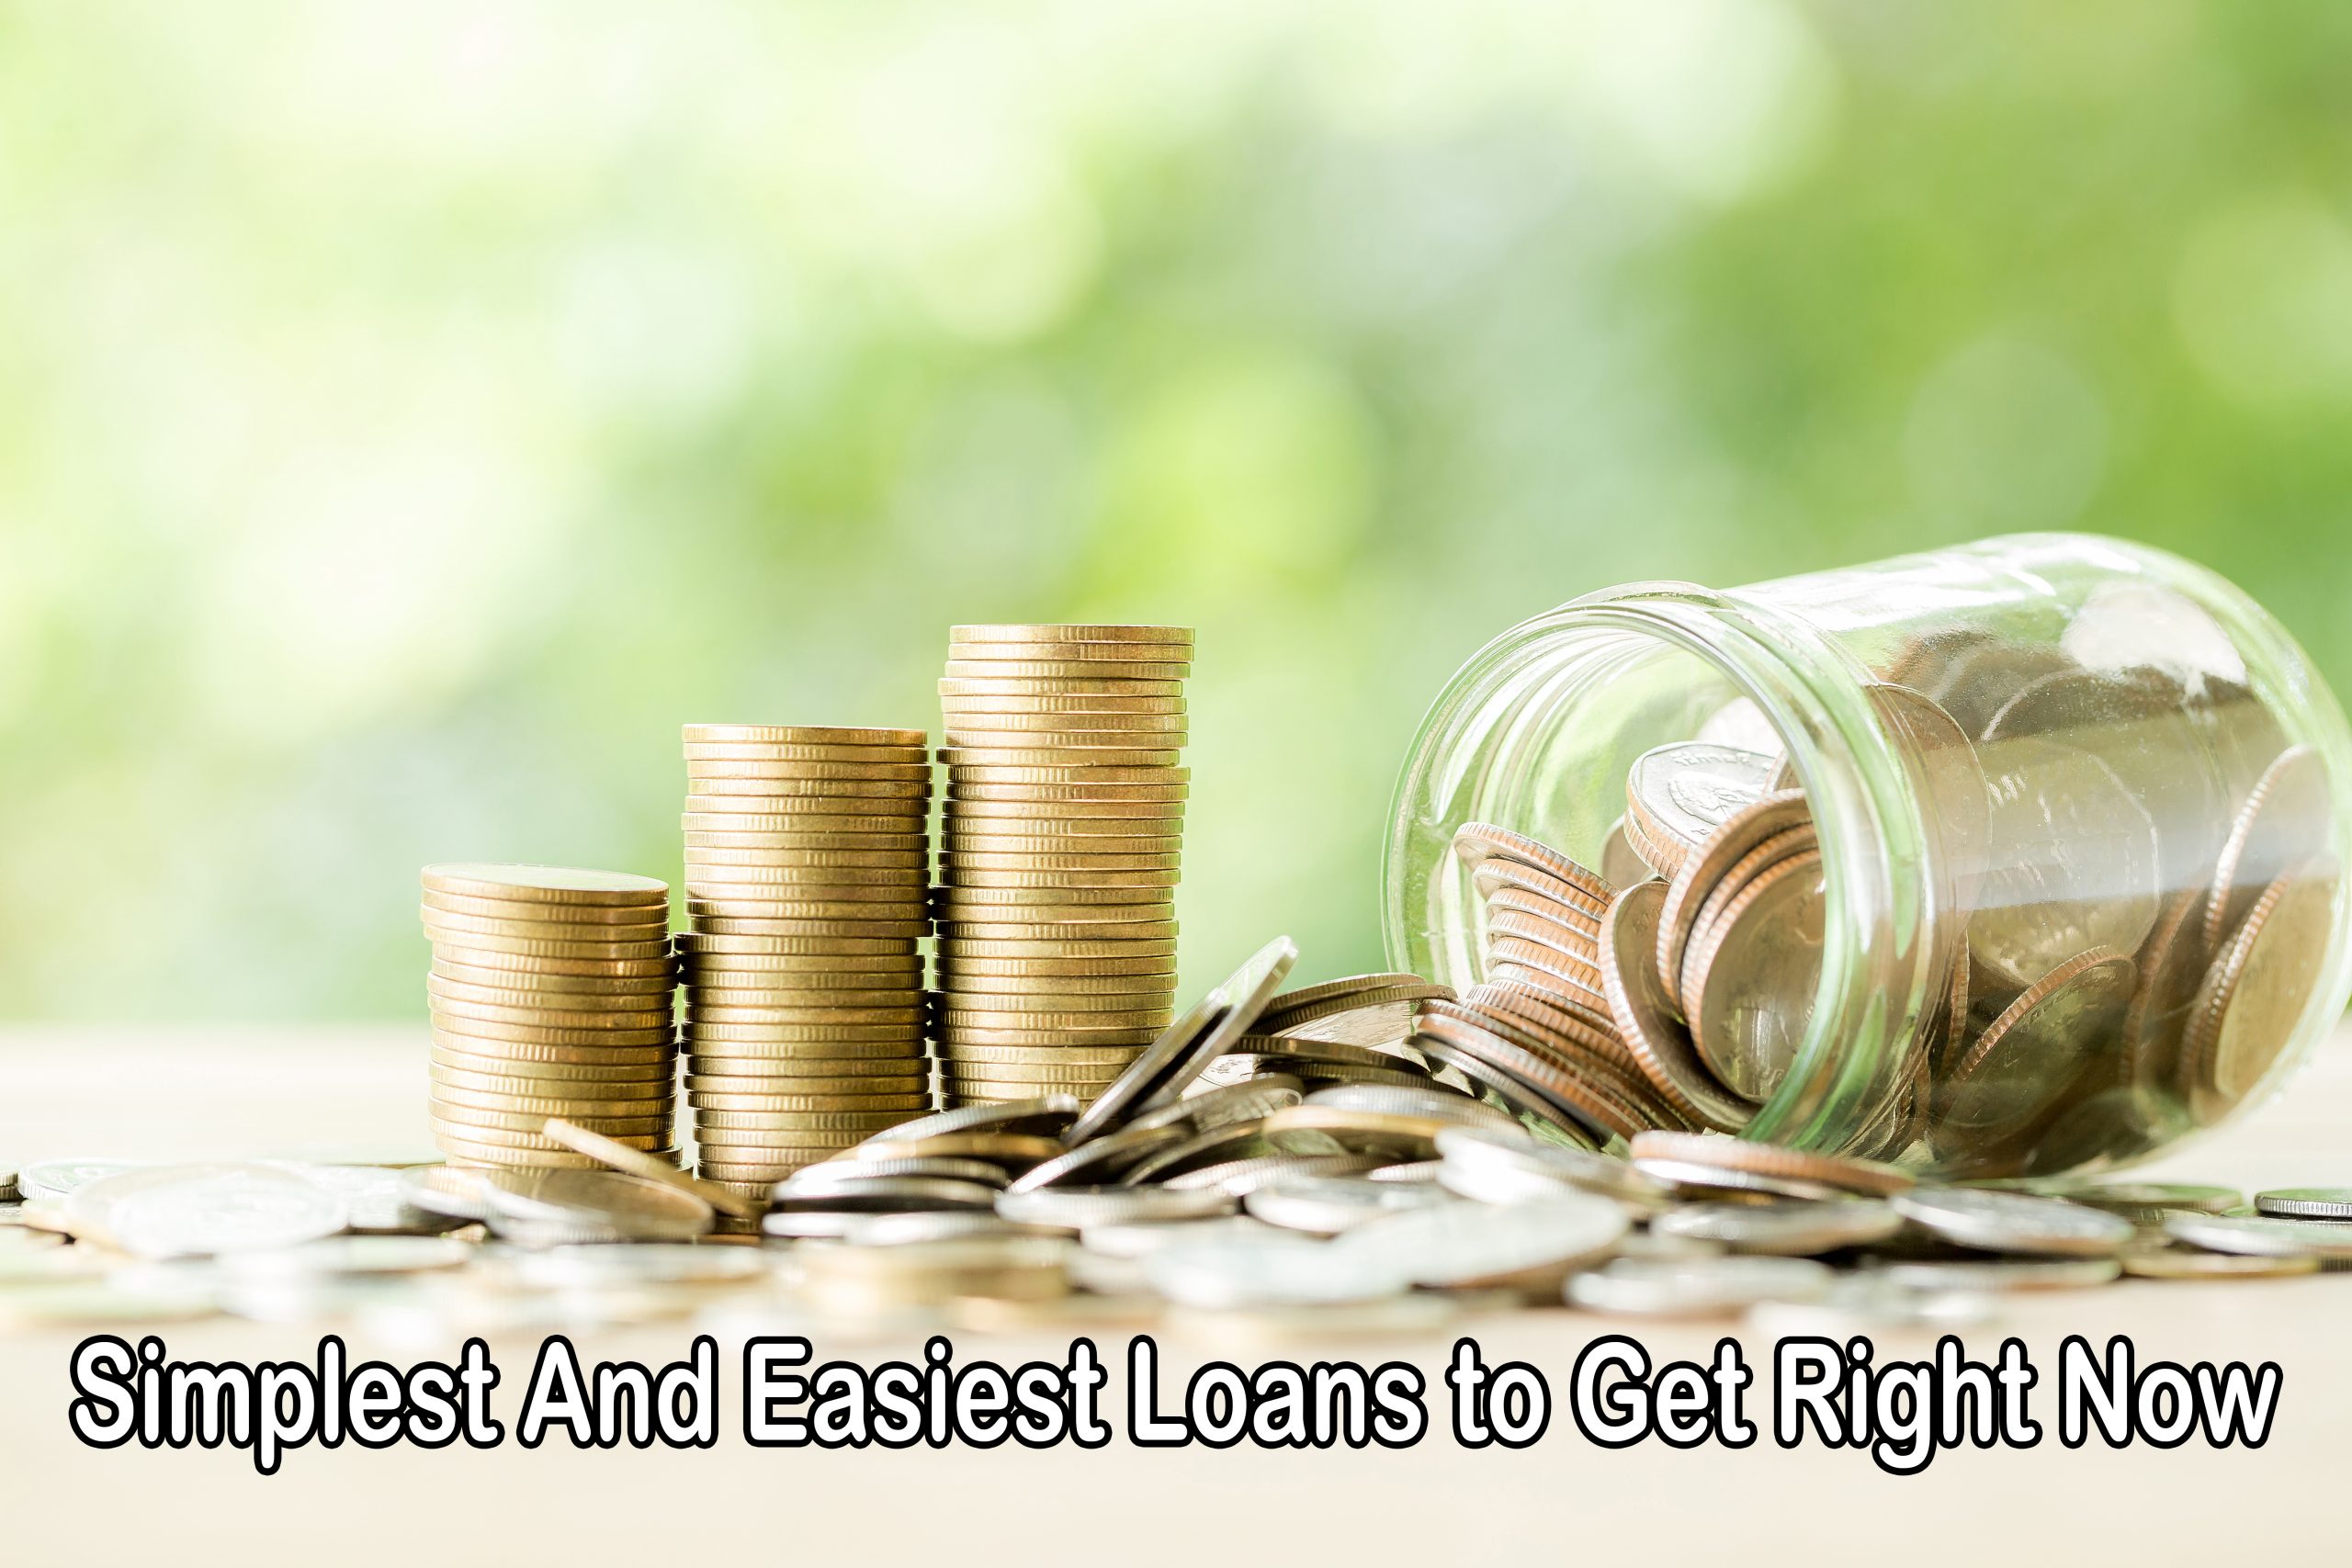 Simplest And Easiest Loans to Get Right Now